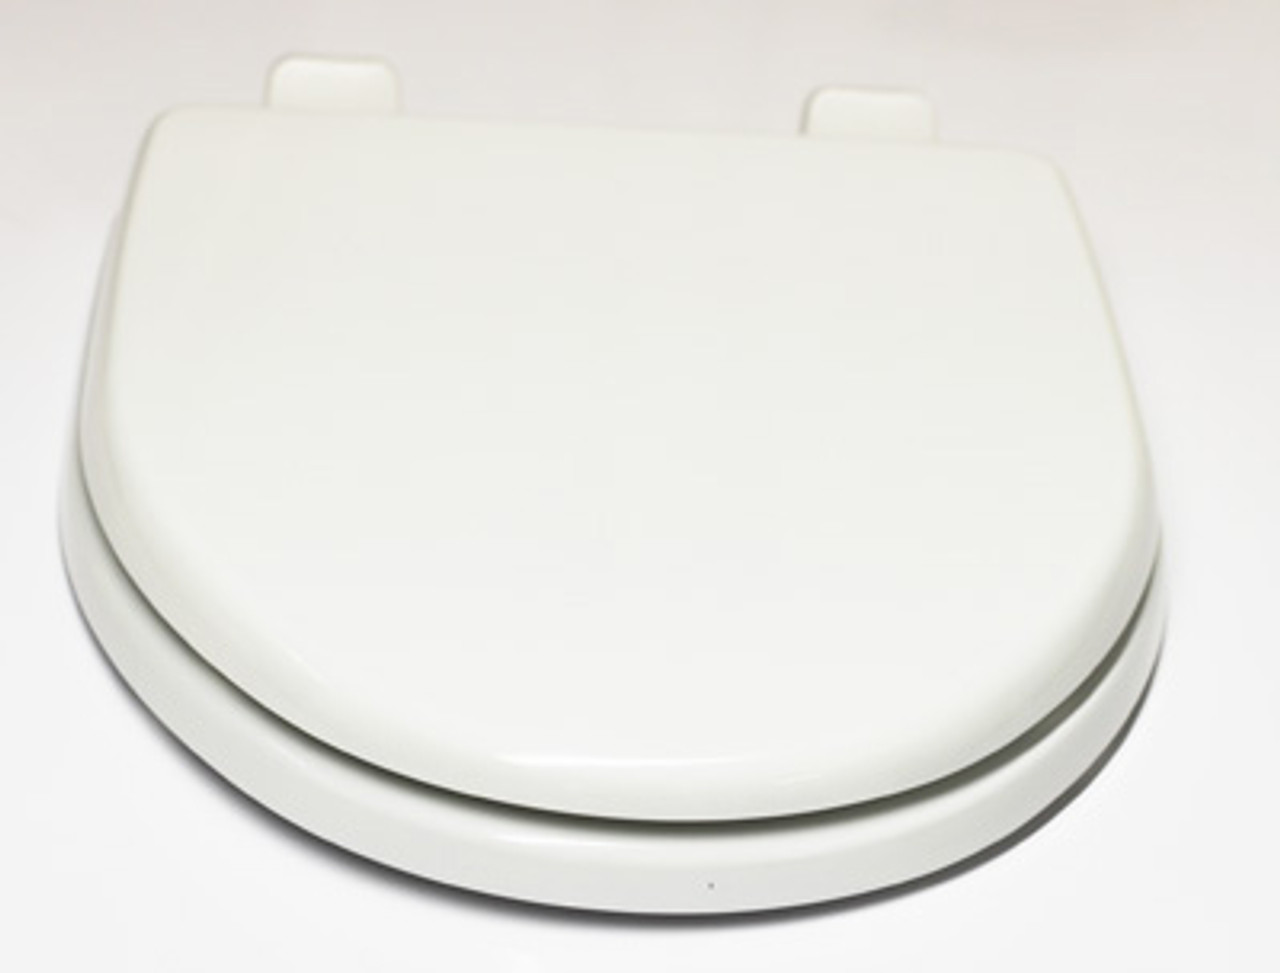 Concerto RV toilet seat and lid